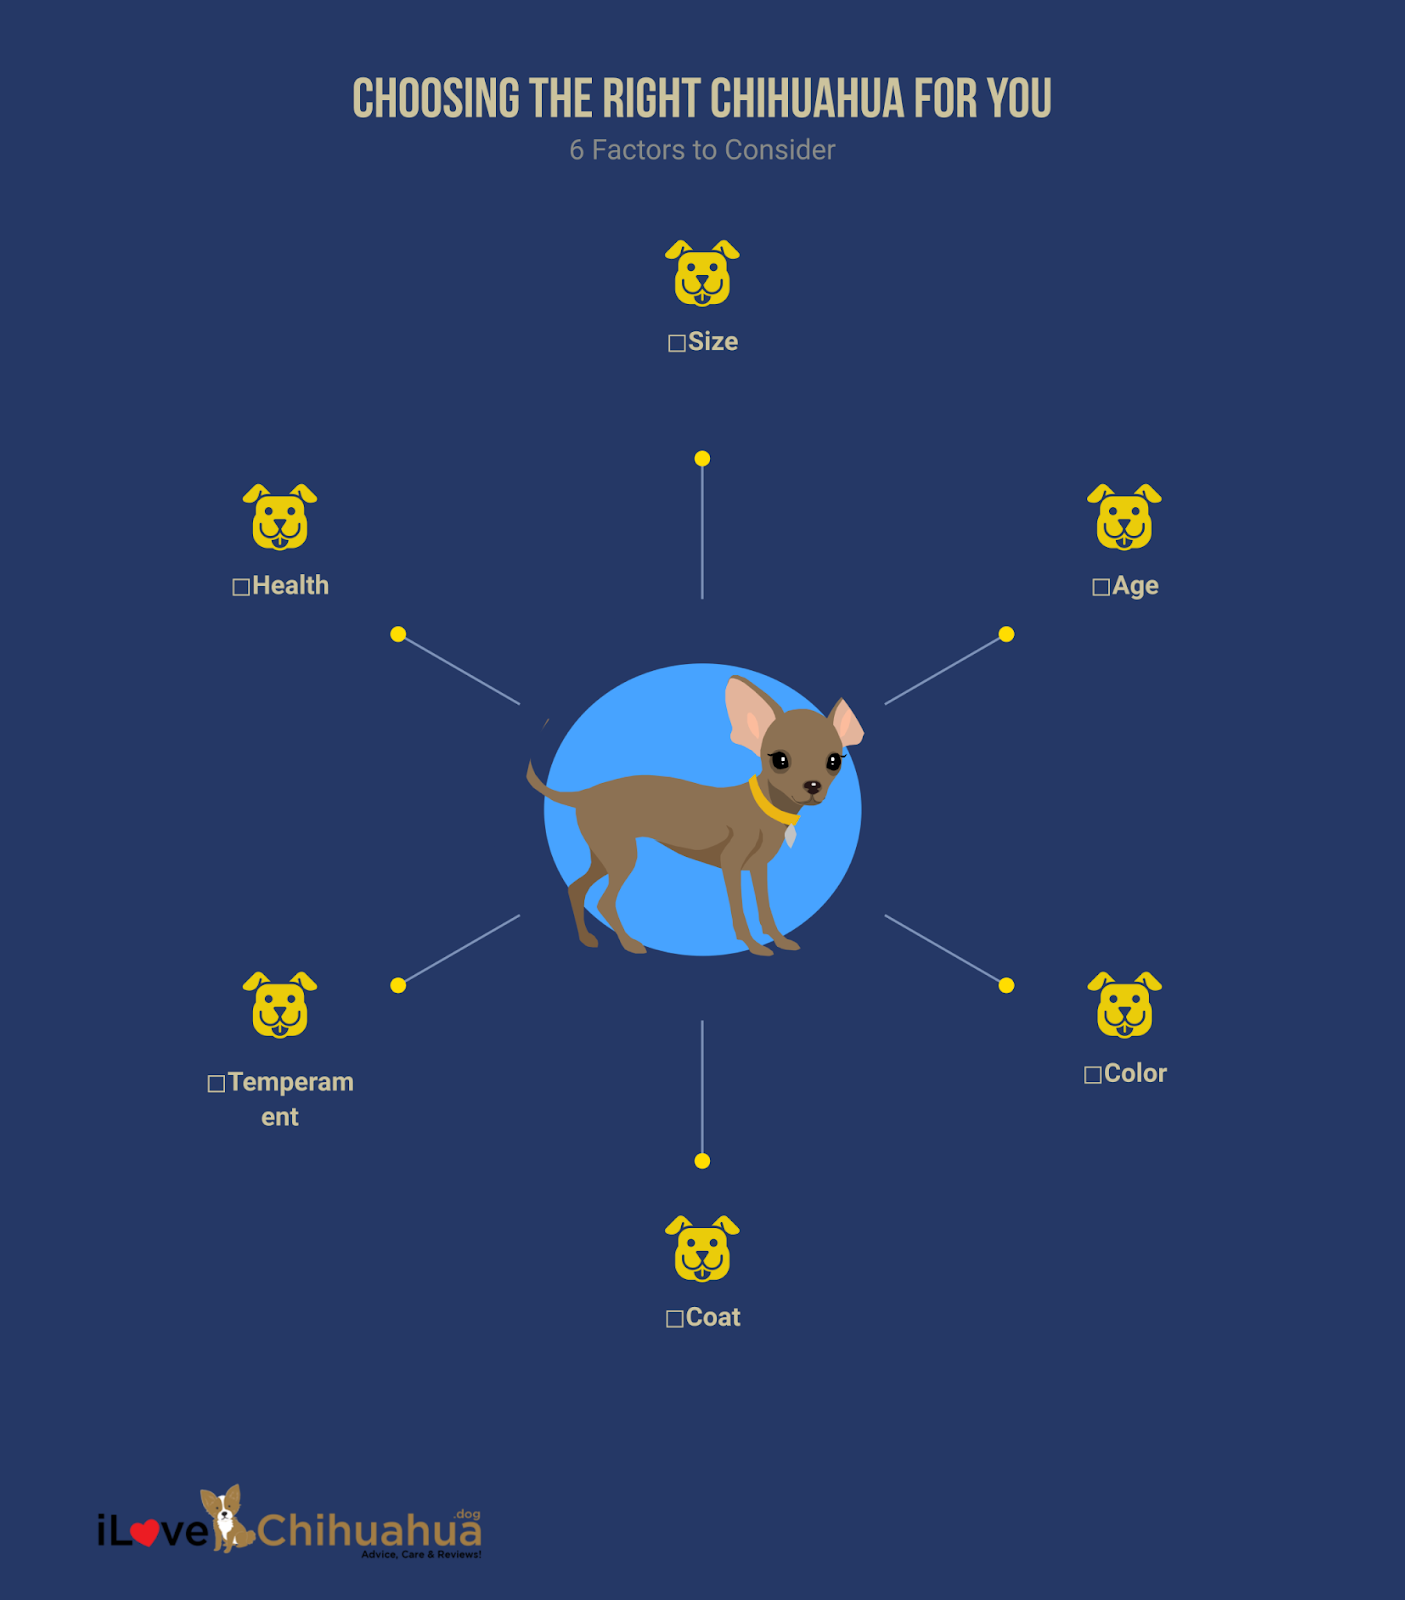 Choosing the Right Chihuahua for You